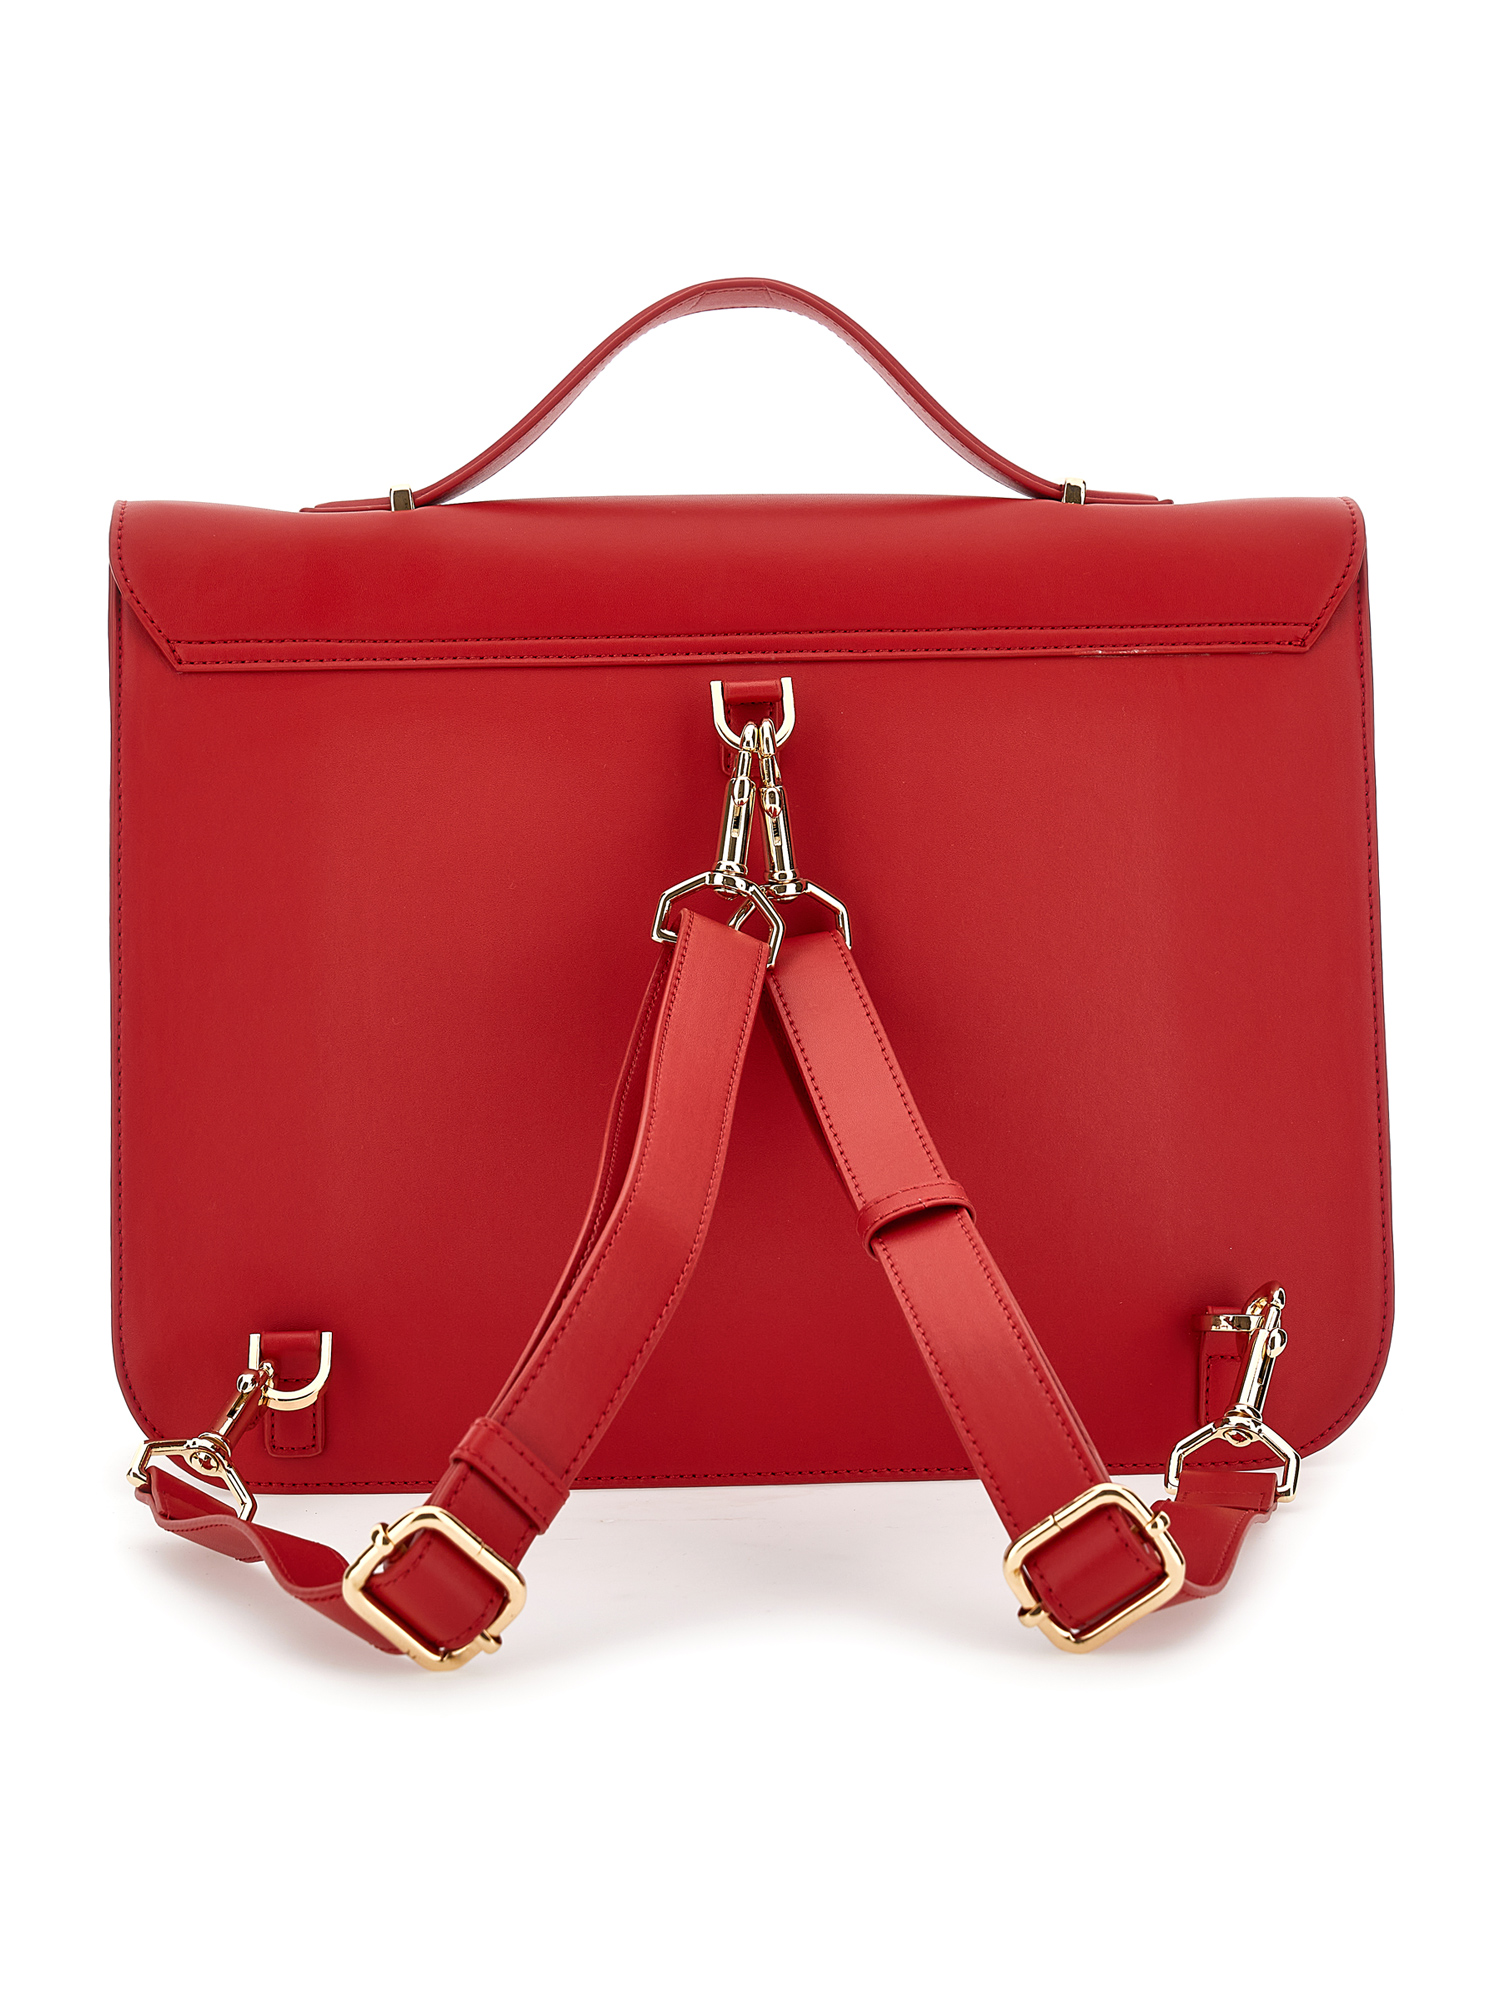 Shop Monnalisa Regenerated Leather Satchel With Bow In Ruby Red